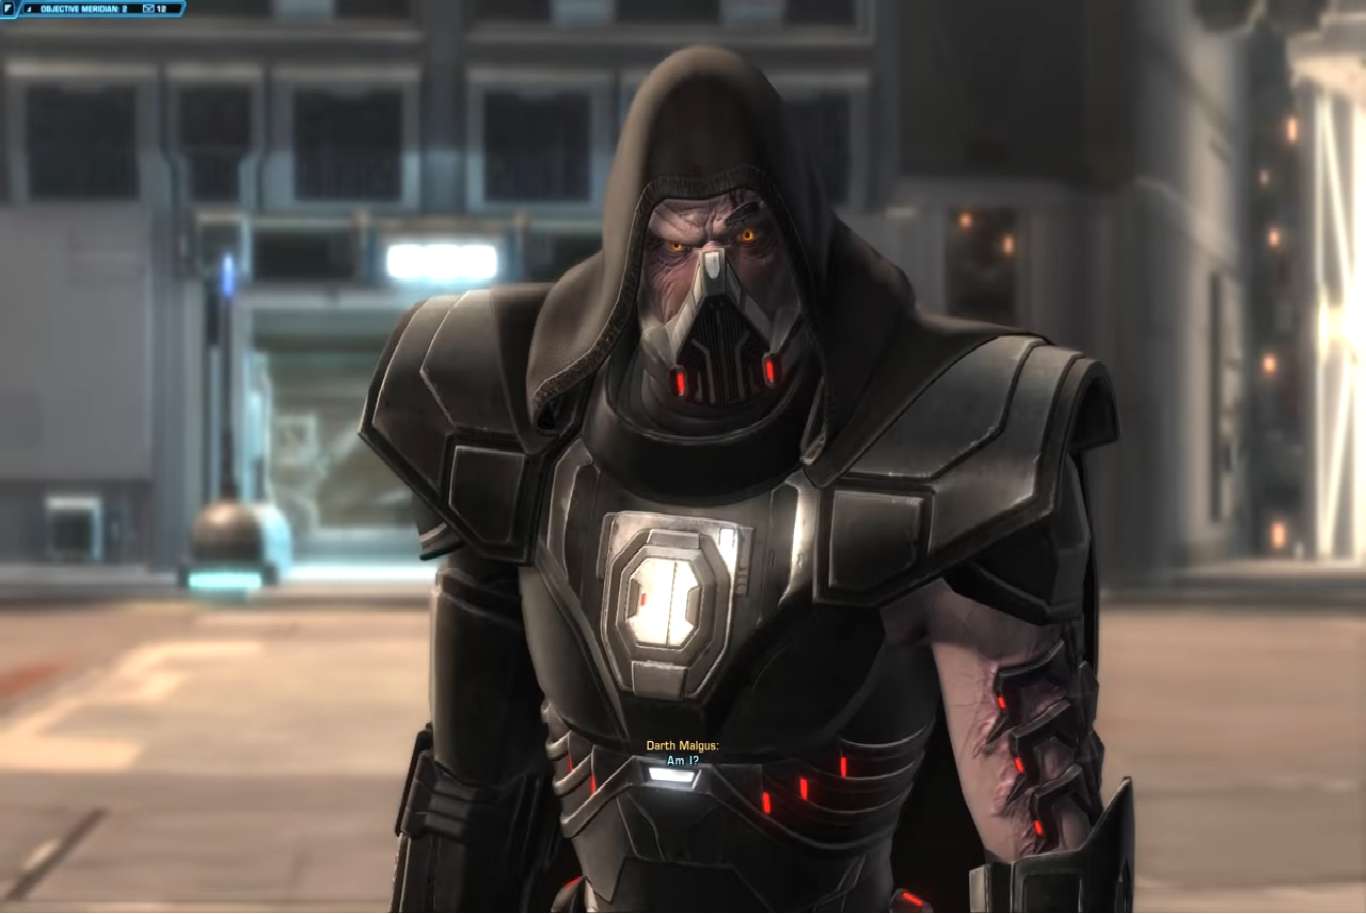 Star Wars The Old Republic Tacticals Both Unique And Rare Items For Players To Add To Their Playstyle